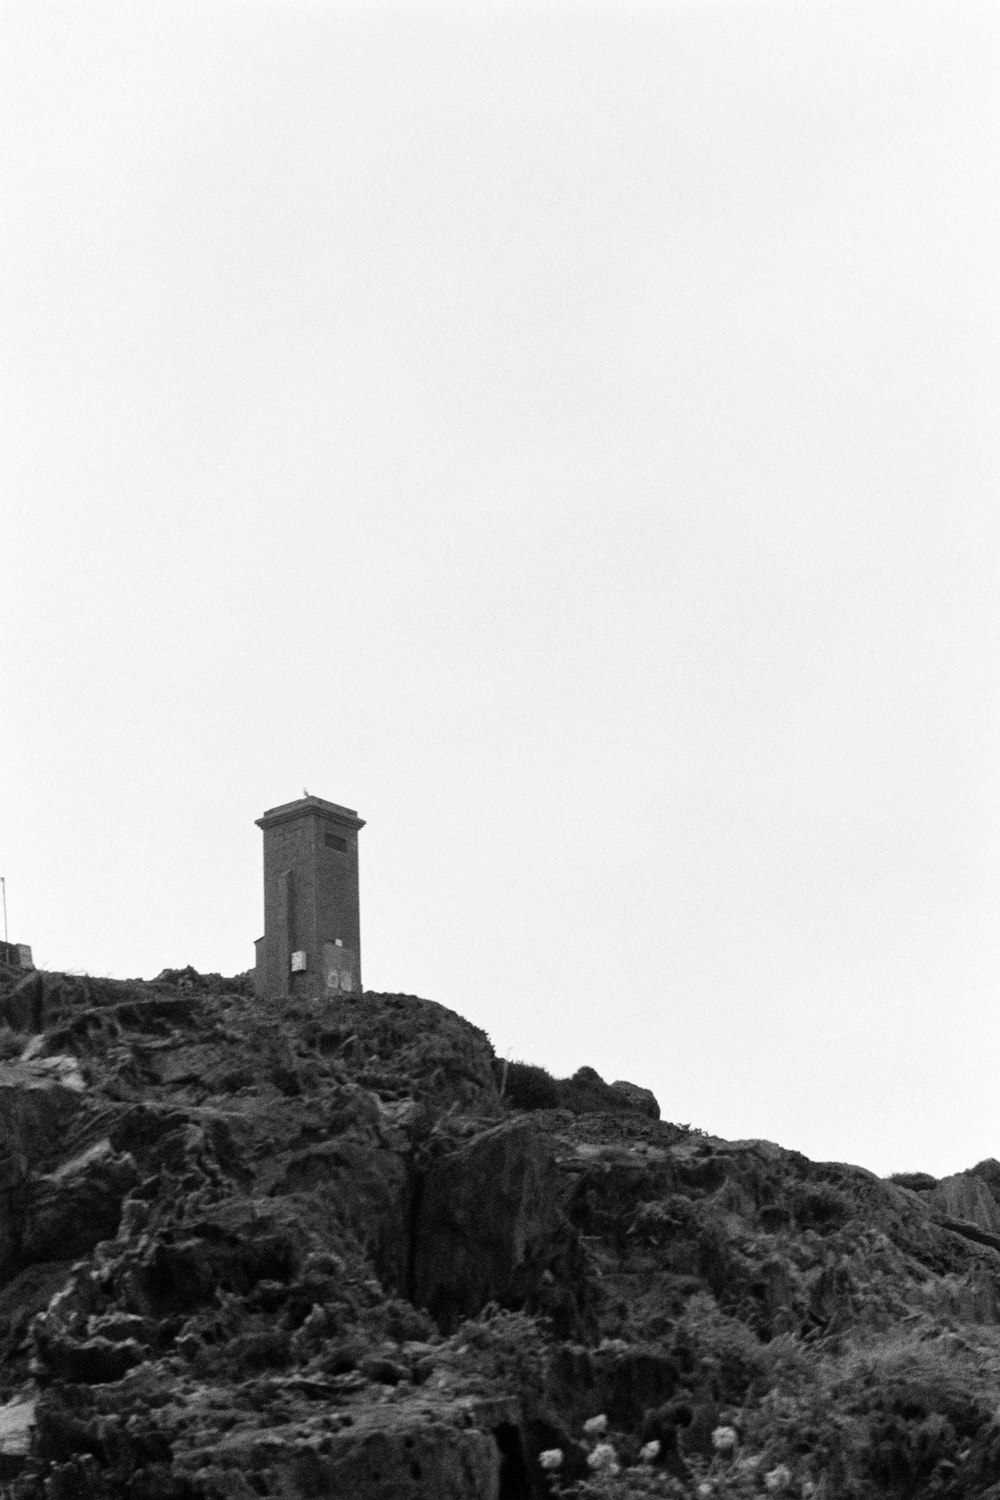 a black and white photo of a tower on a hill